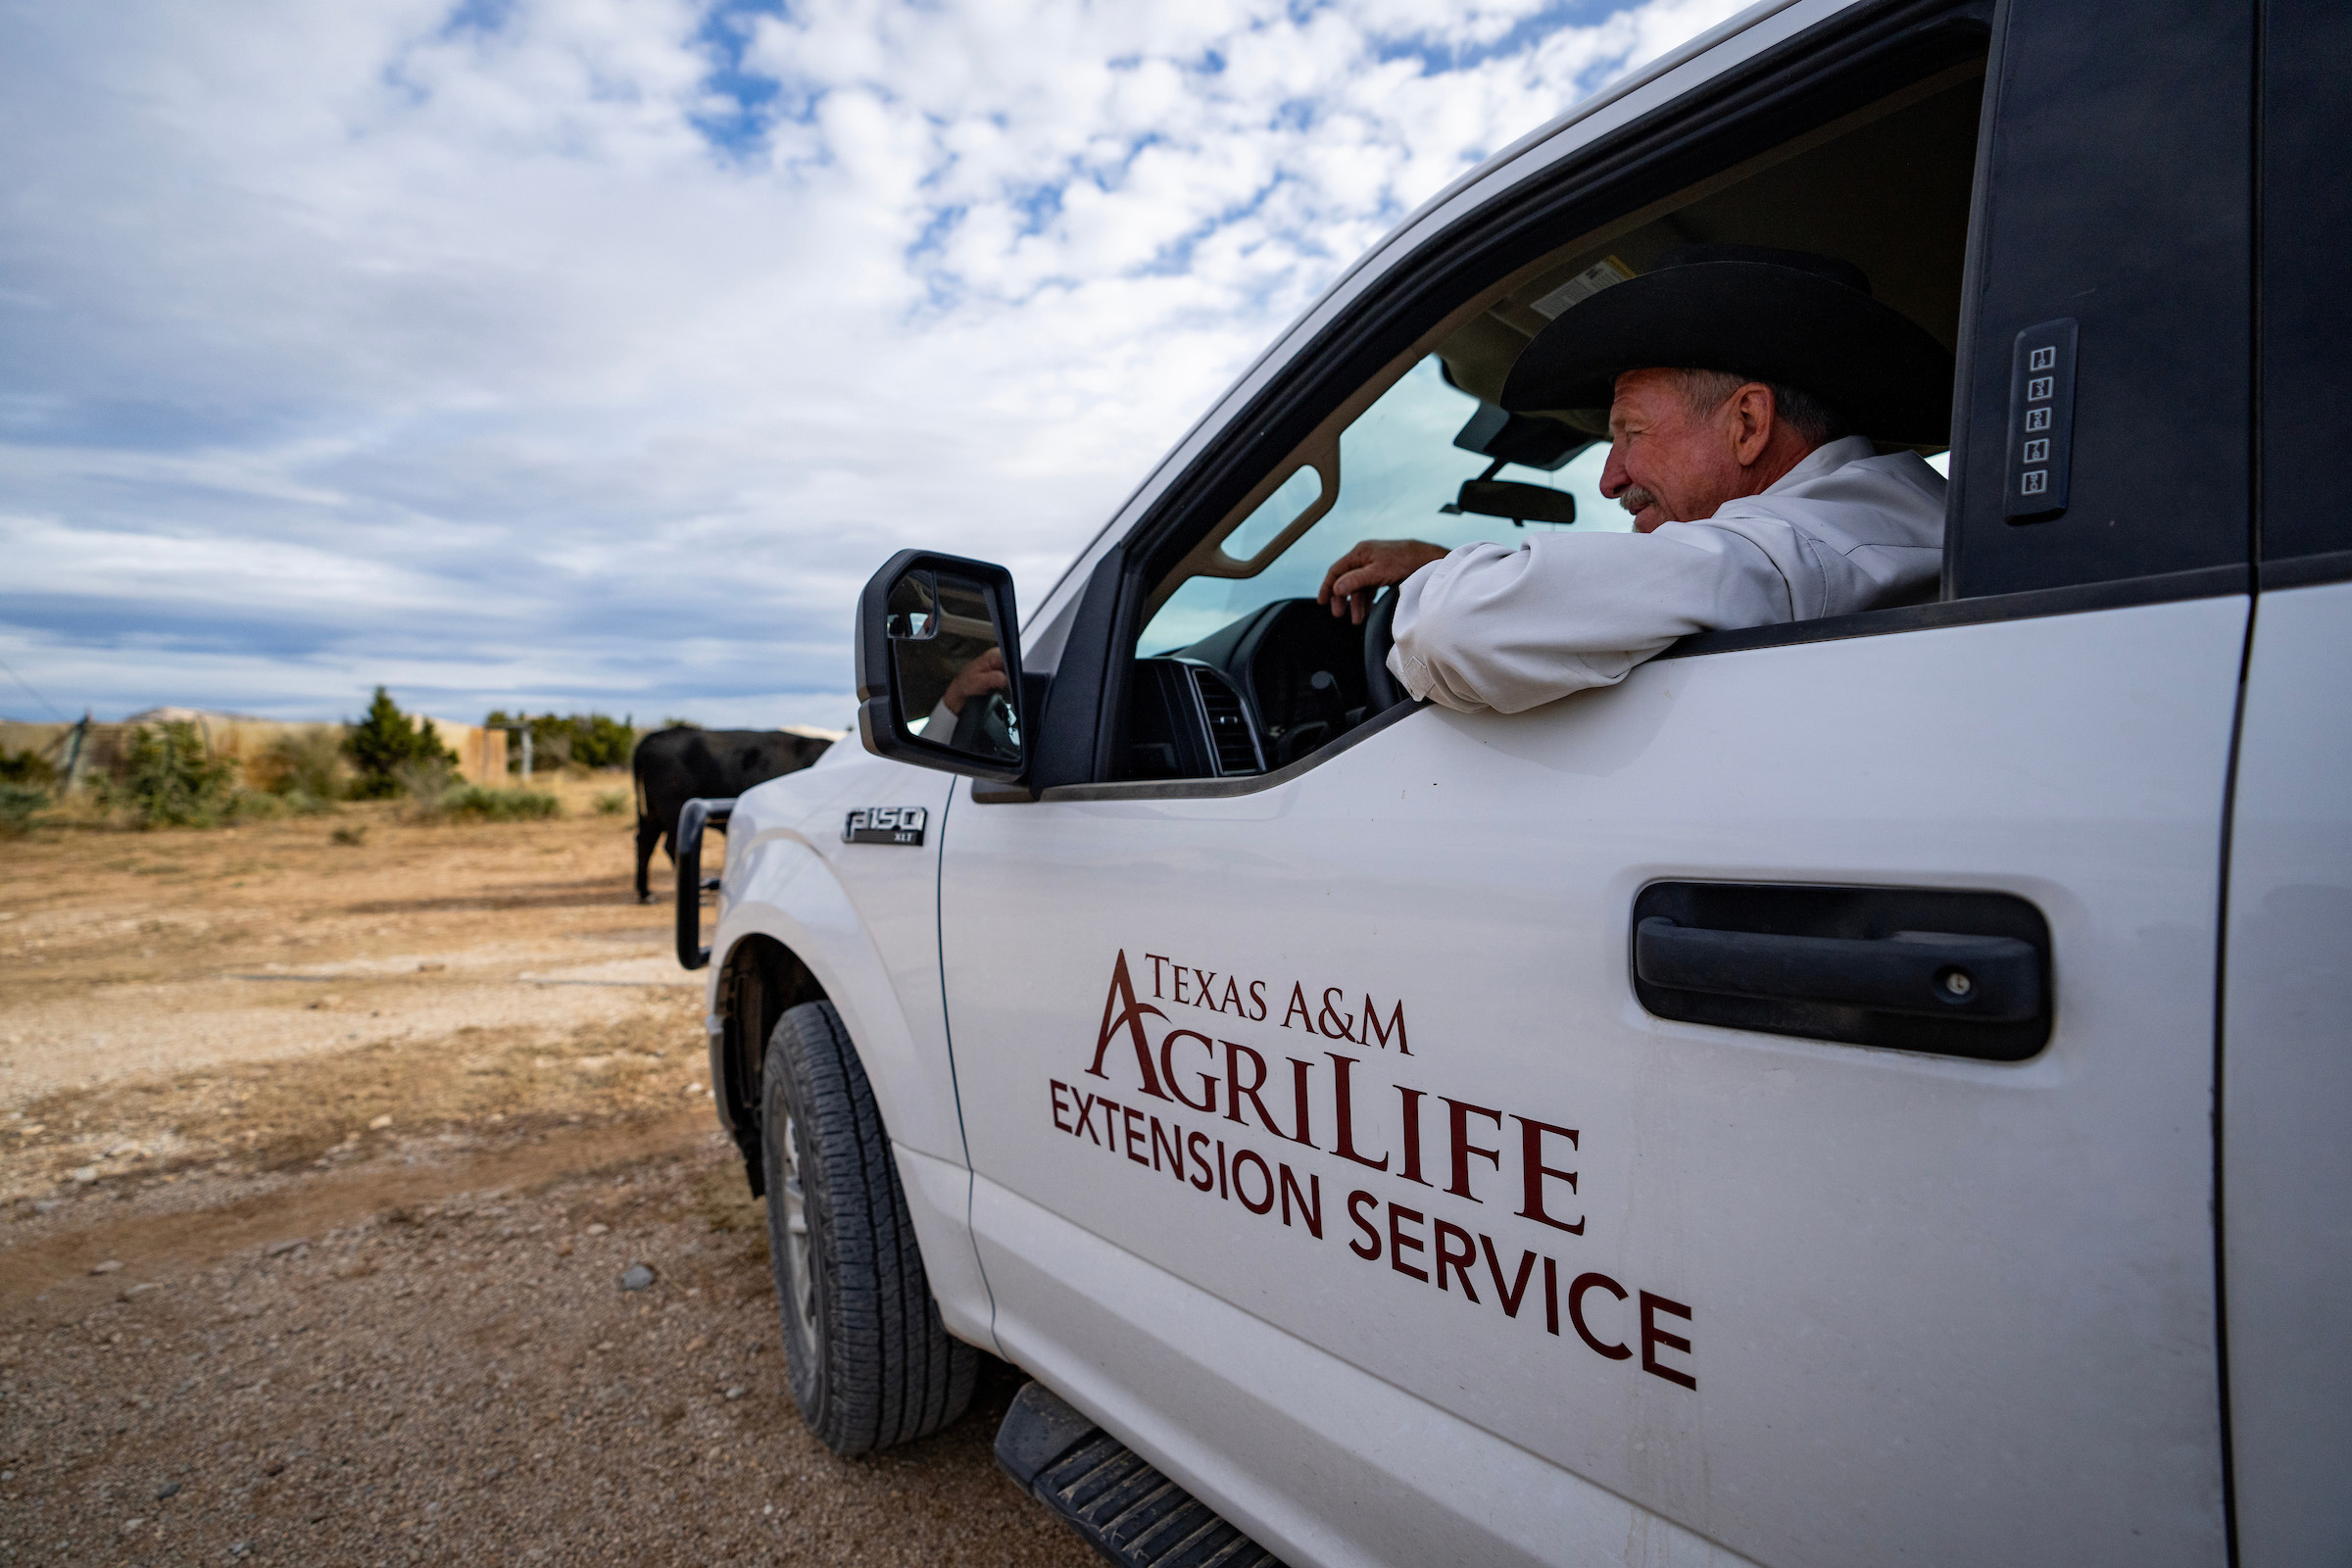 Extension agent in truck, which is labeled with the Texas A&M AgriLife Extension logo